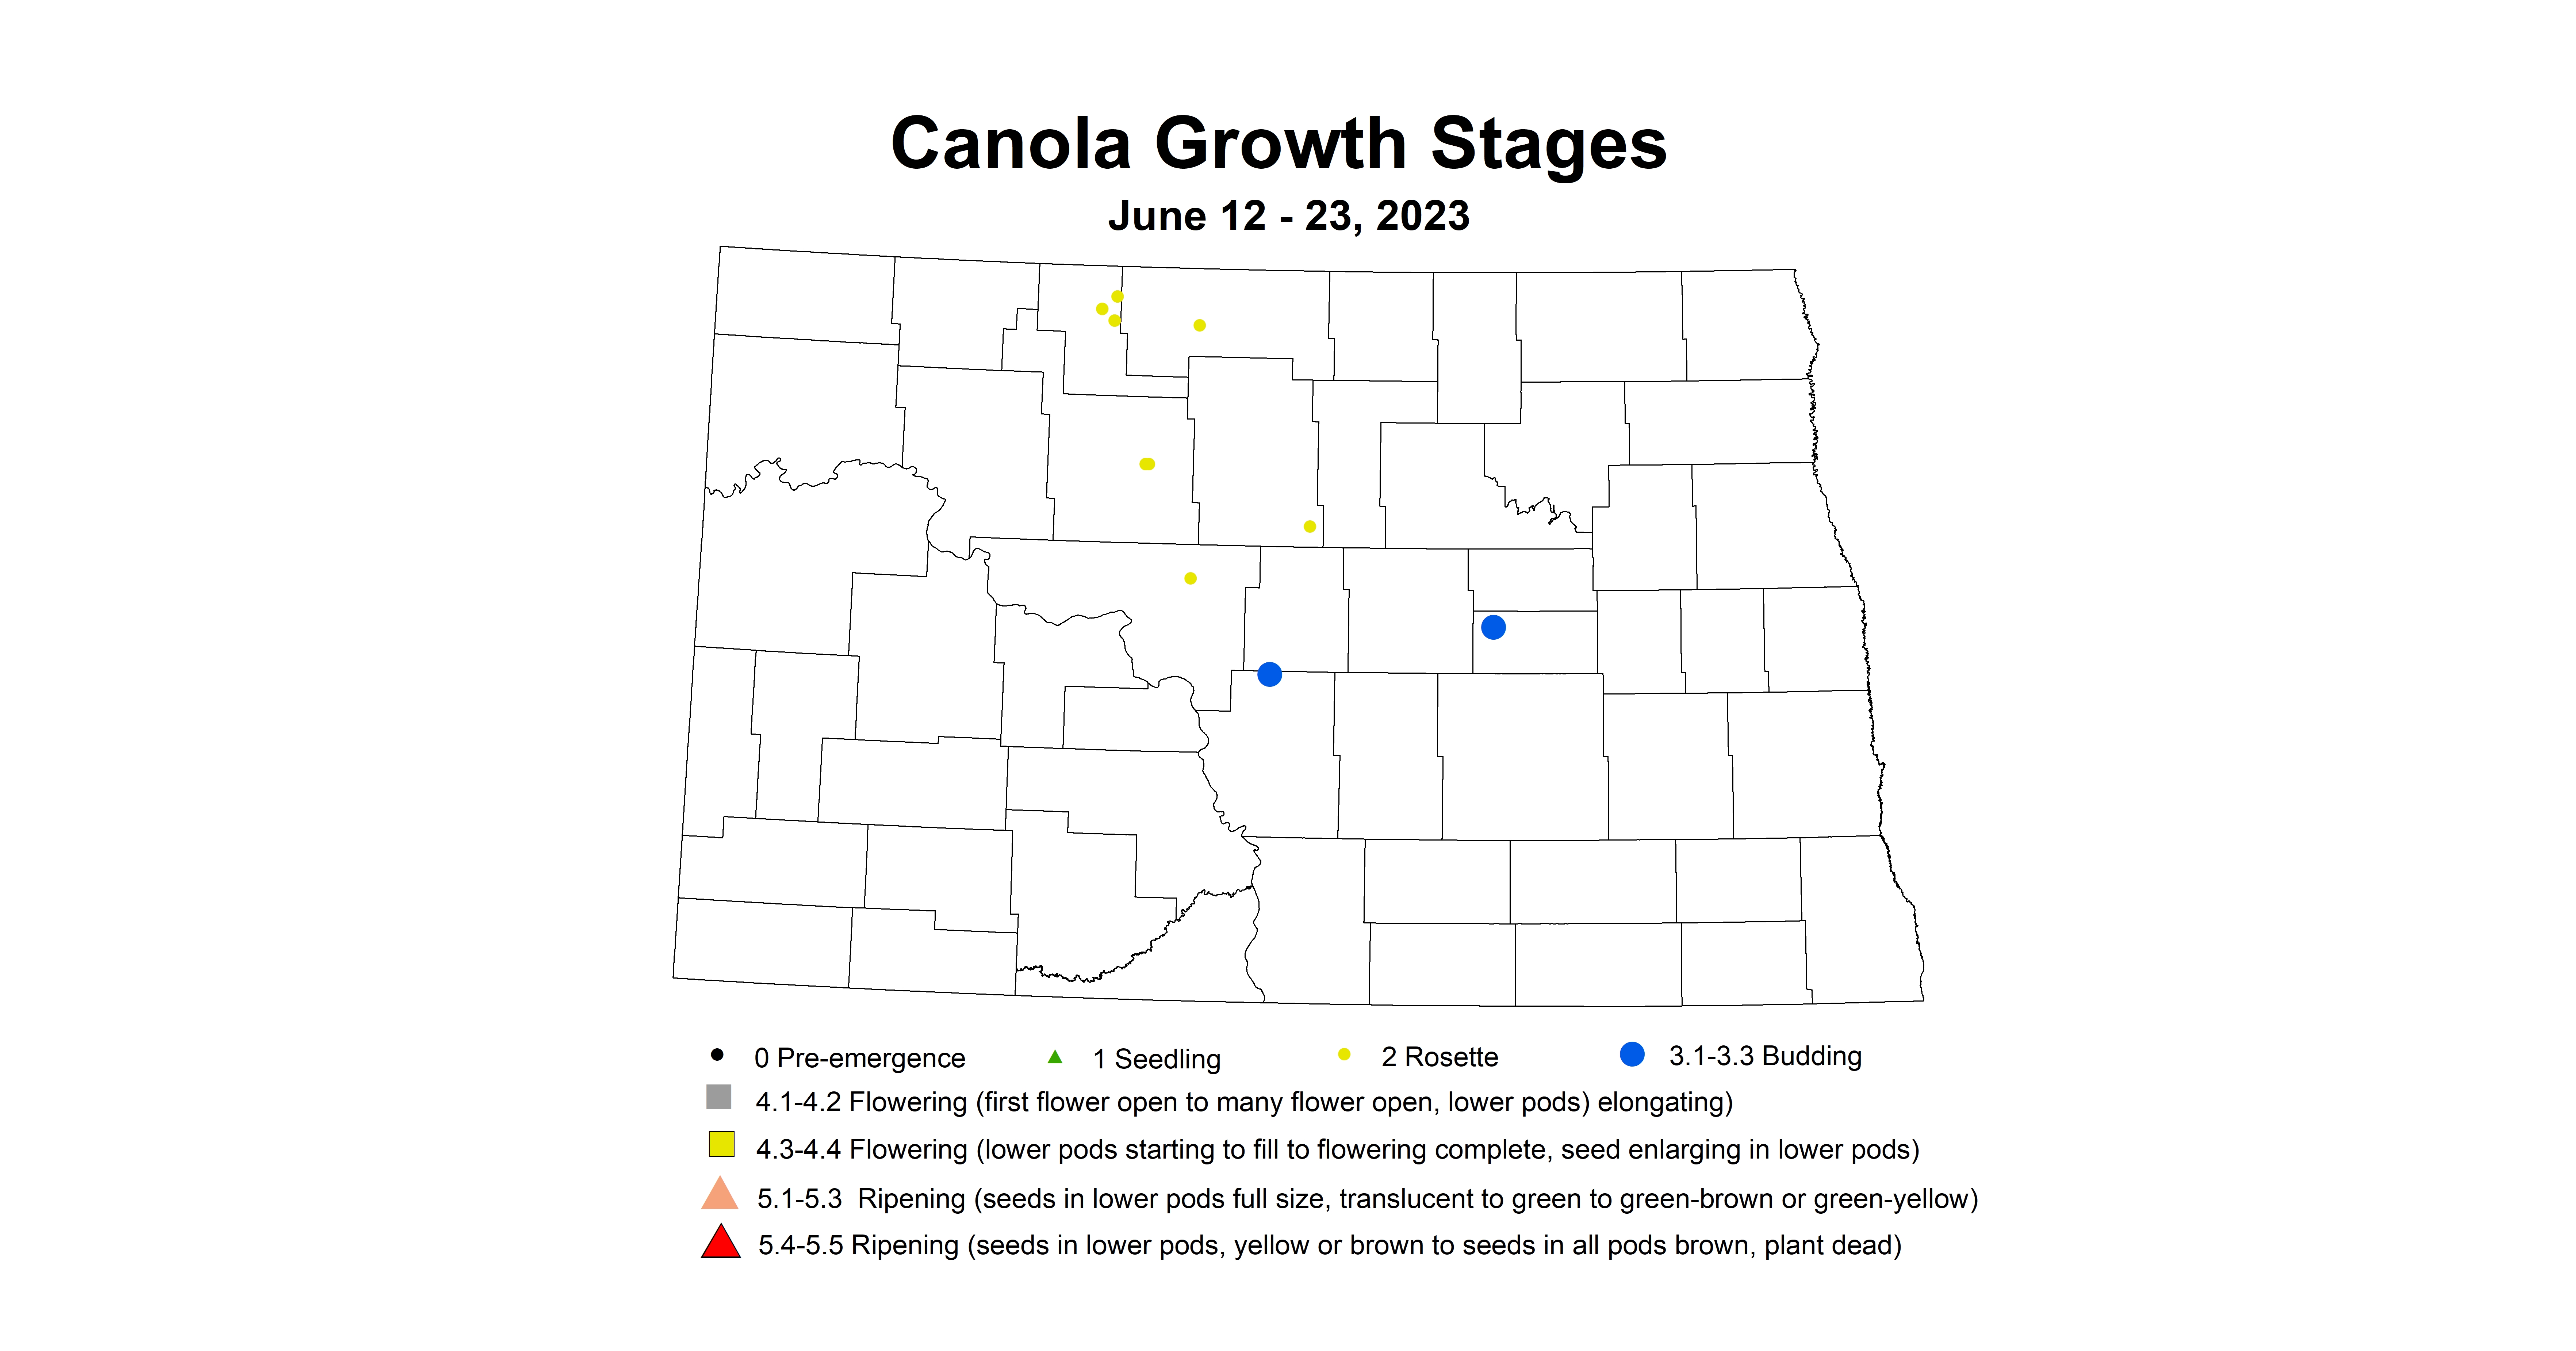 canola growth stages June 12-23 2023